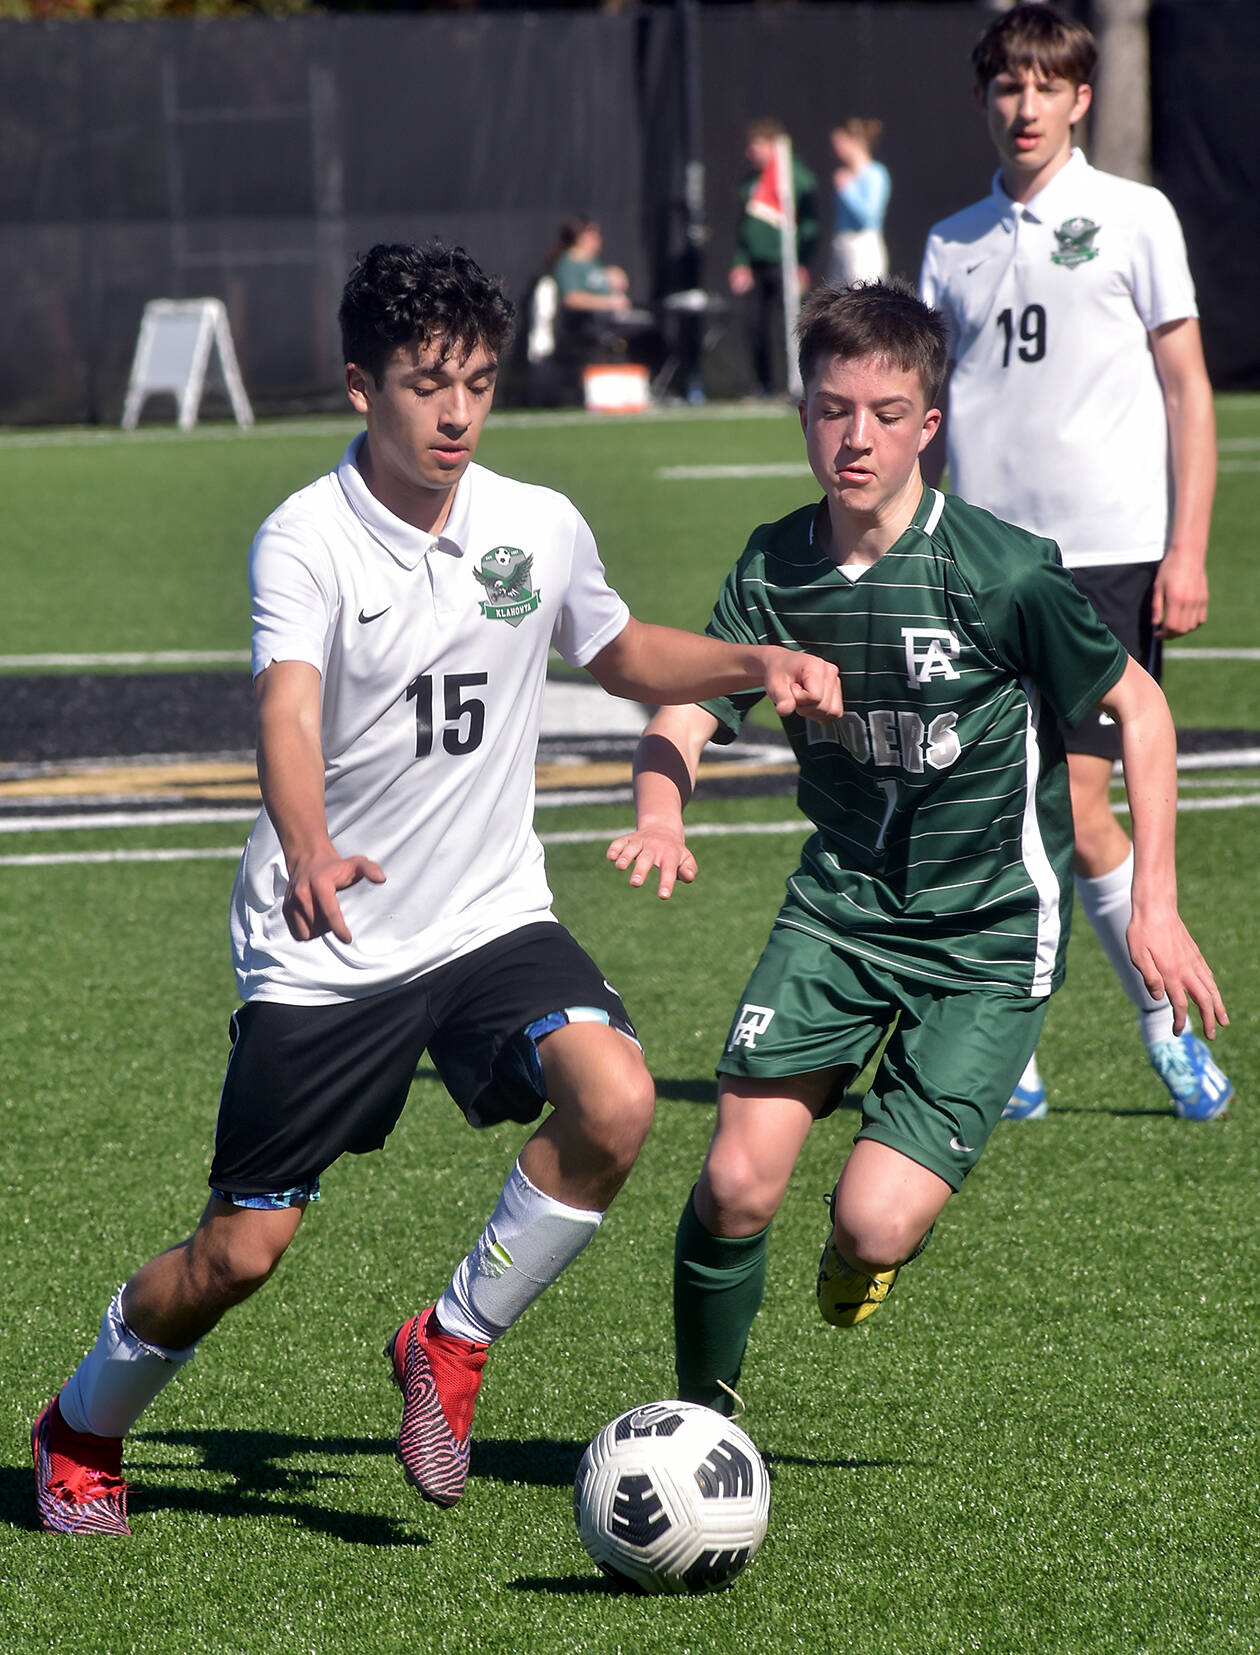 KEITH THORPE/PENINSULA DAILY NEWS
Port Angeles’ Daniel Blondolillo, right, fights for control with Klahowya’s J.J. Quinones, left, as Klahowya’s Elijah Body looks on during Saturday’s match in Port Angeles.